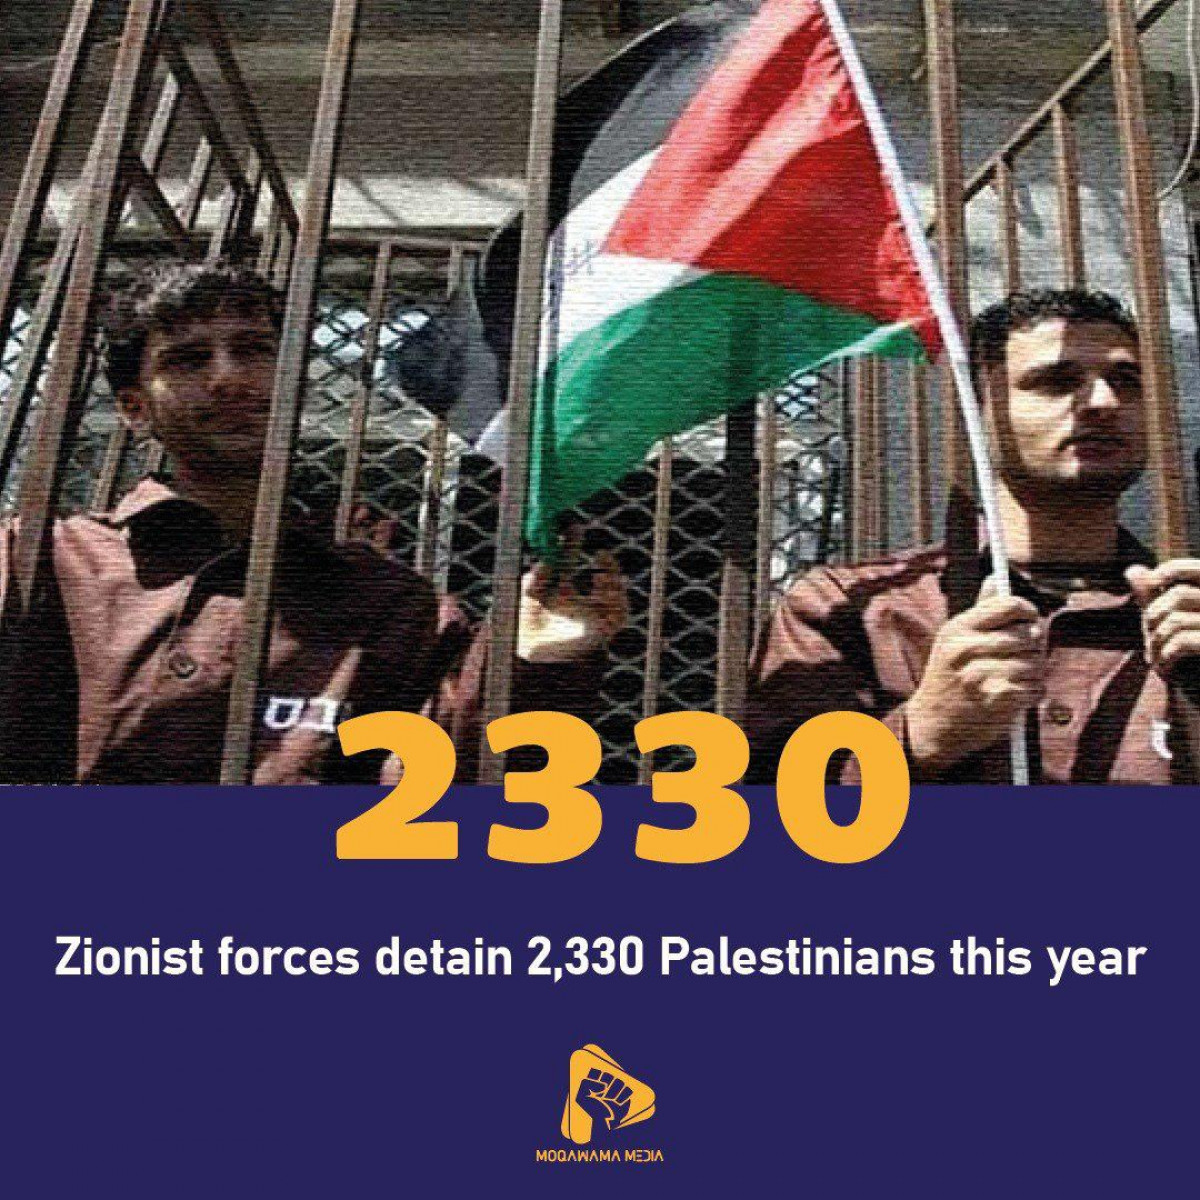 Zionist forces detain 2,330 Palestinians this year